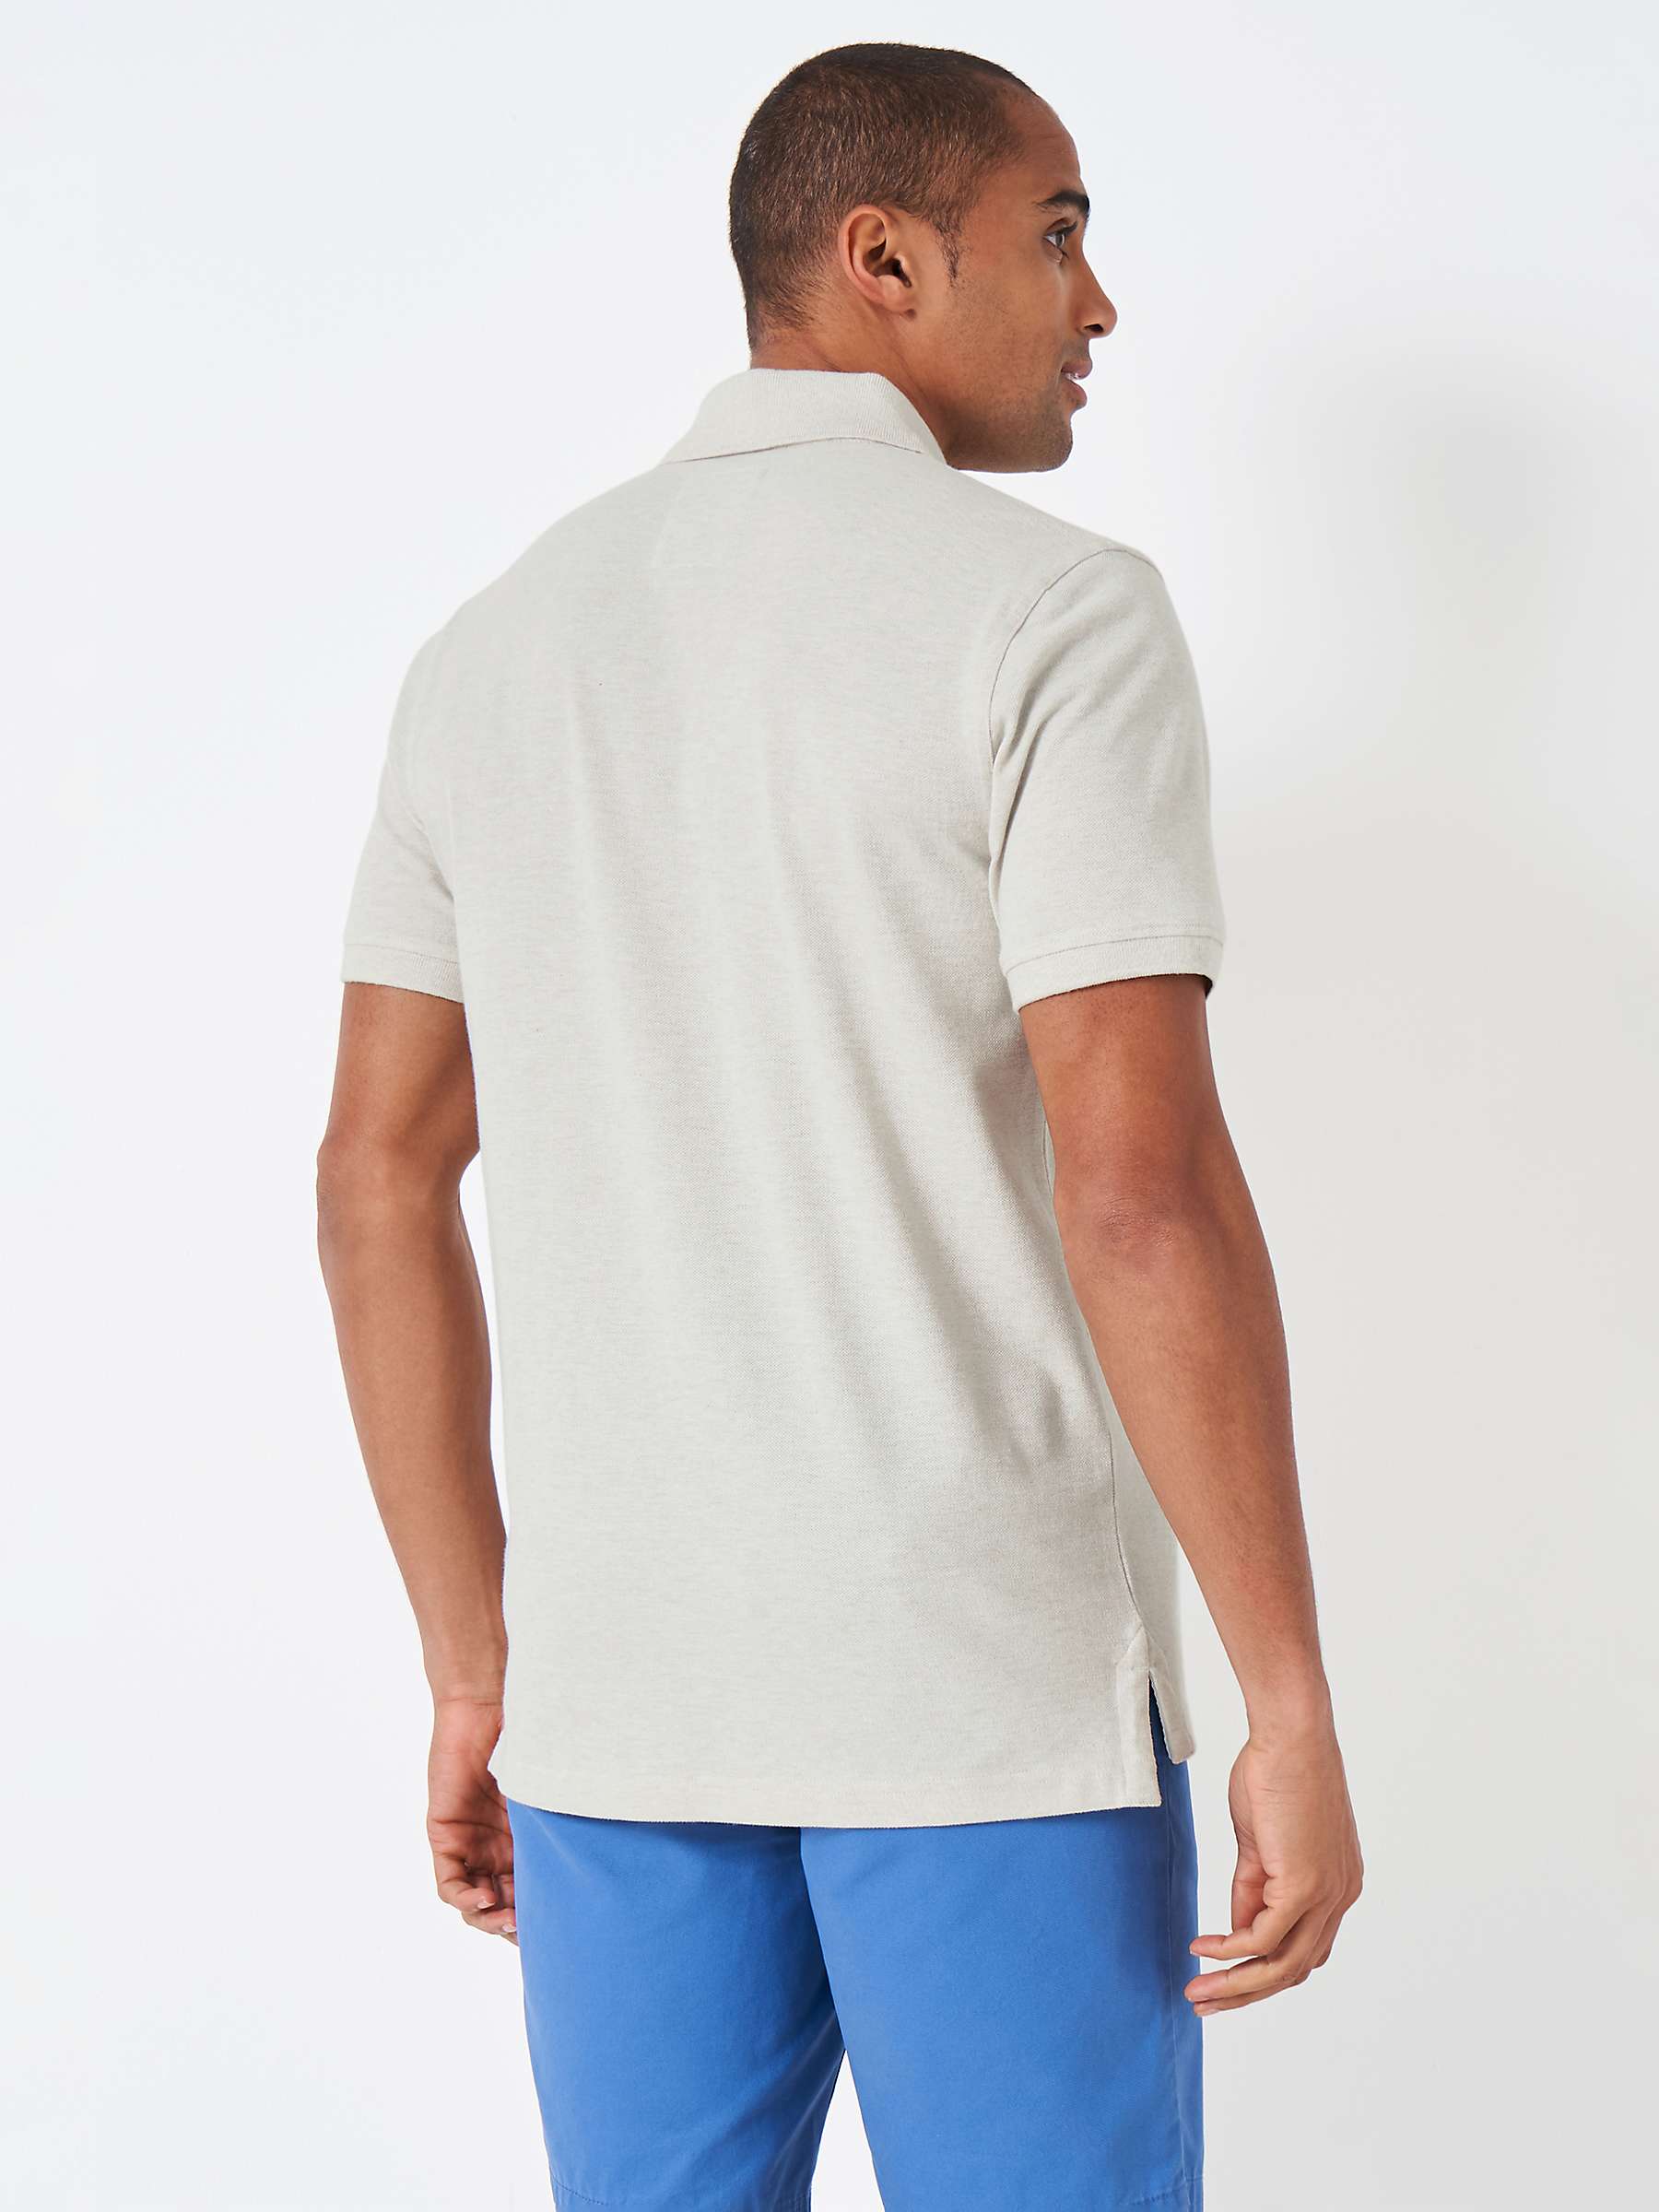 Buy Crew Clothing Classic Pique Polo Top Online at johnlewis.com